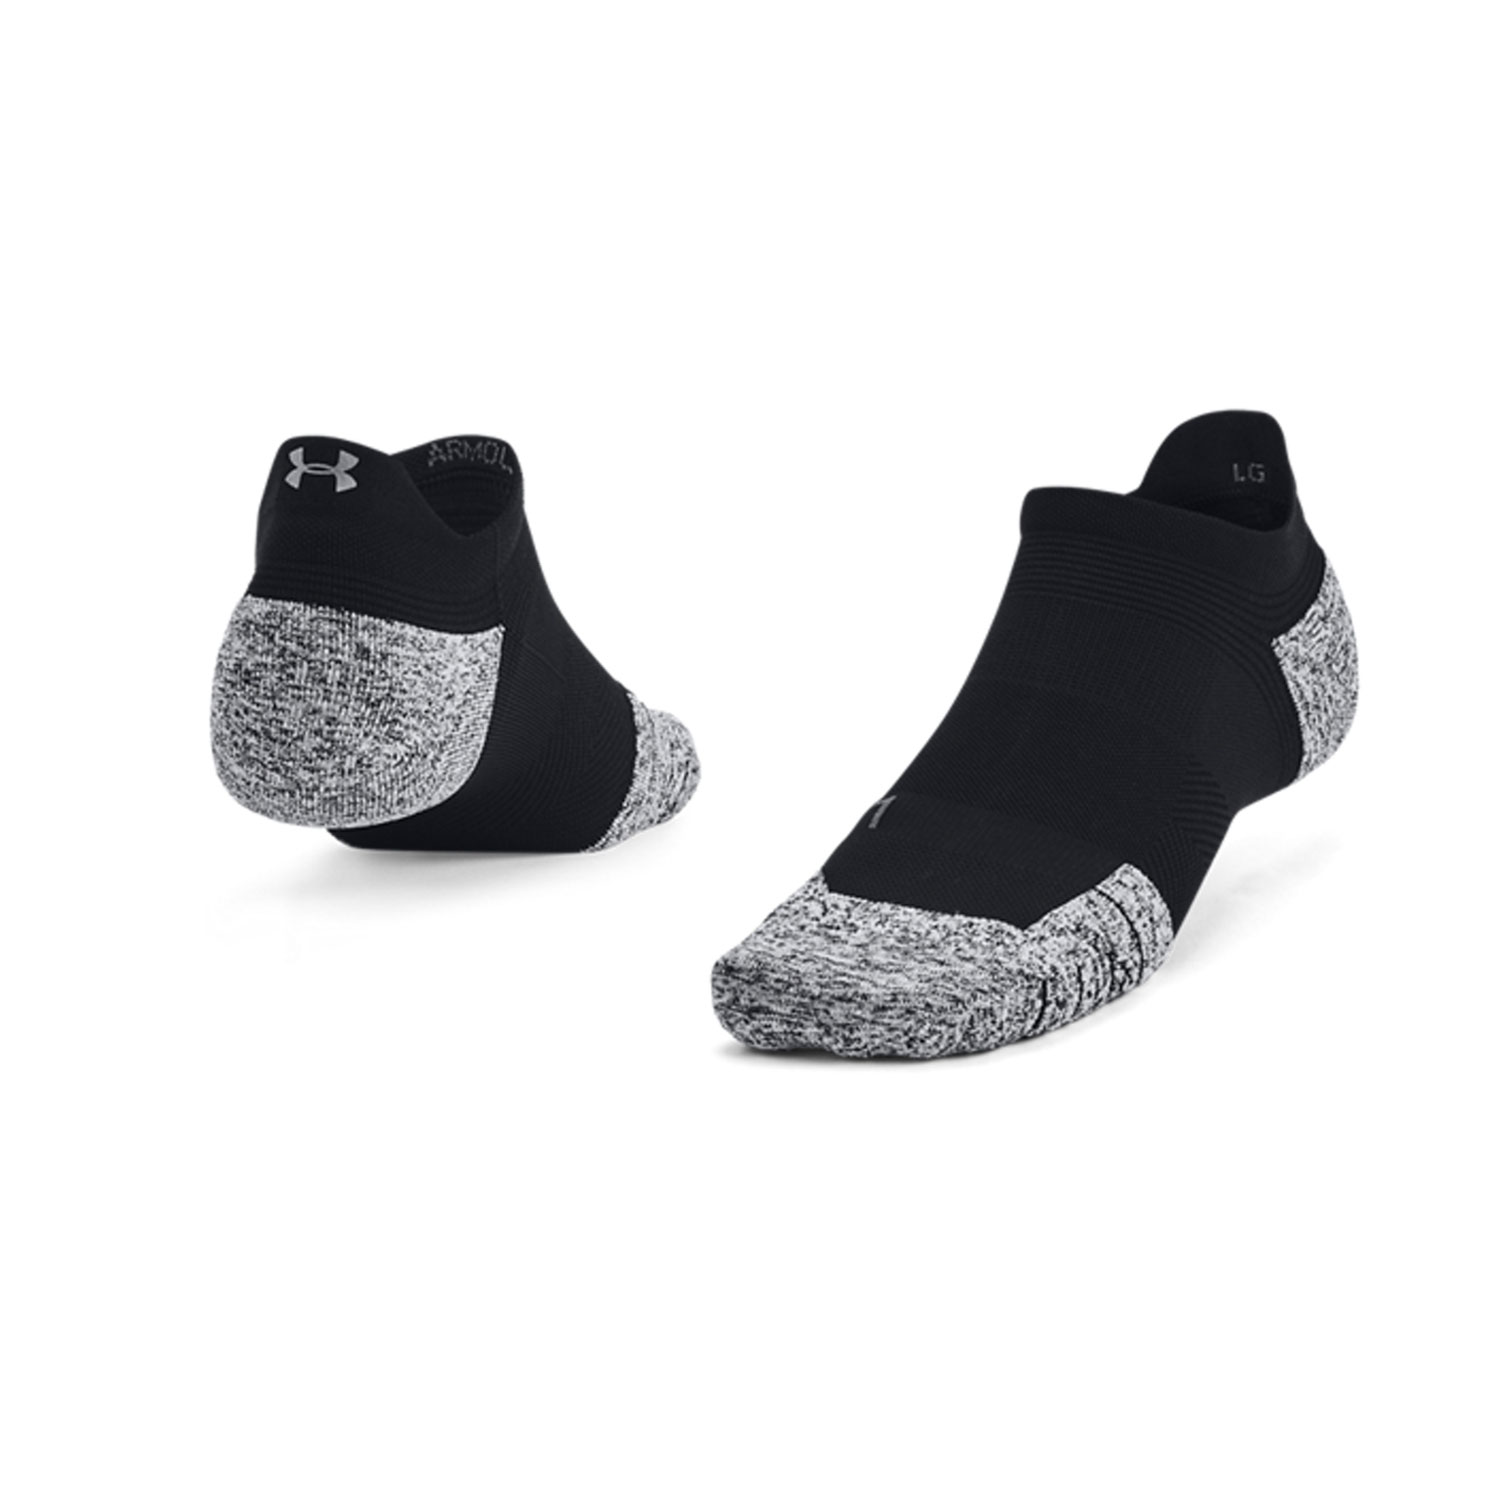 Under Armour ArmourDry Cushion Calze - Black/Pitch Gray/Reflective